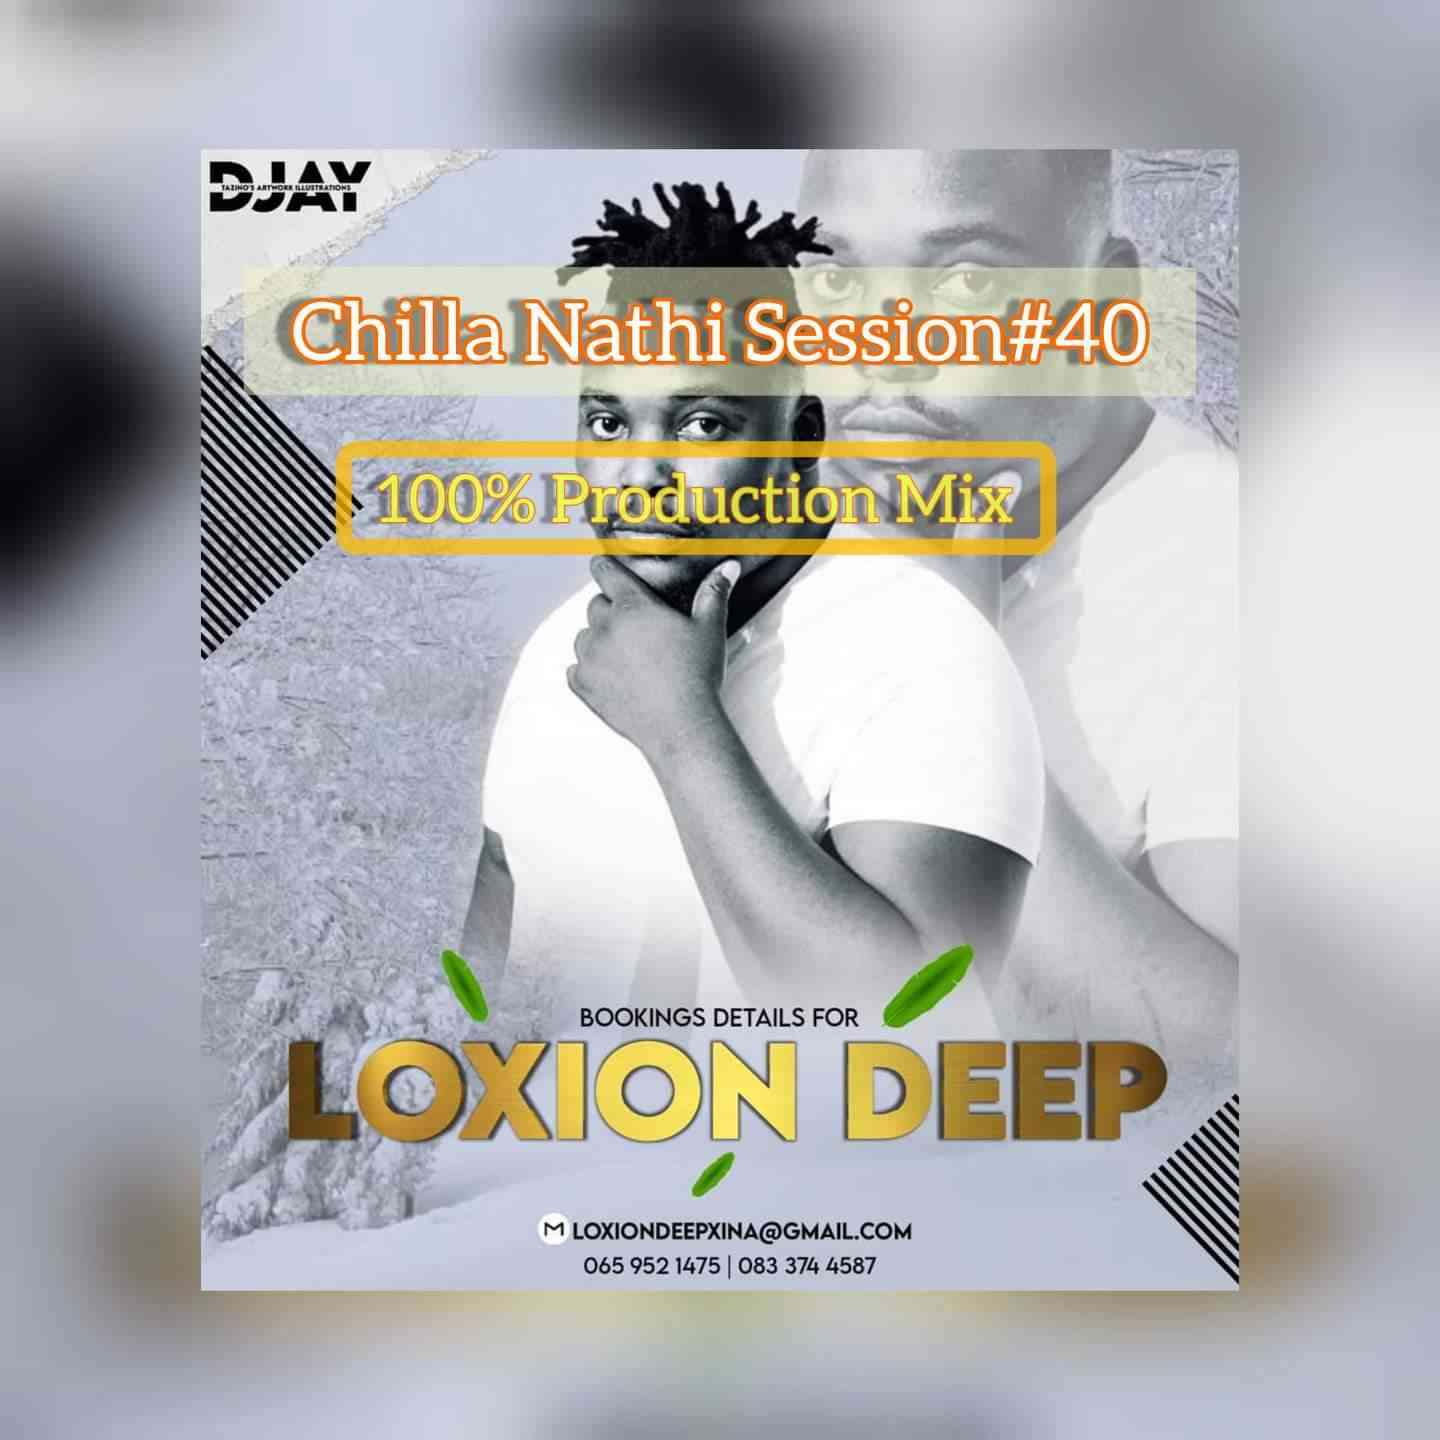 DOWNLOAD MP3 Loxion Deep Chilla Nathi Session 40 (100 Production